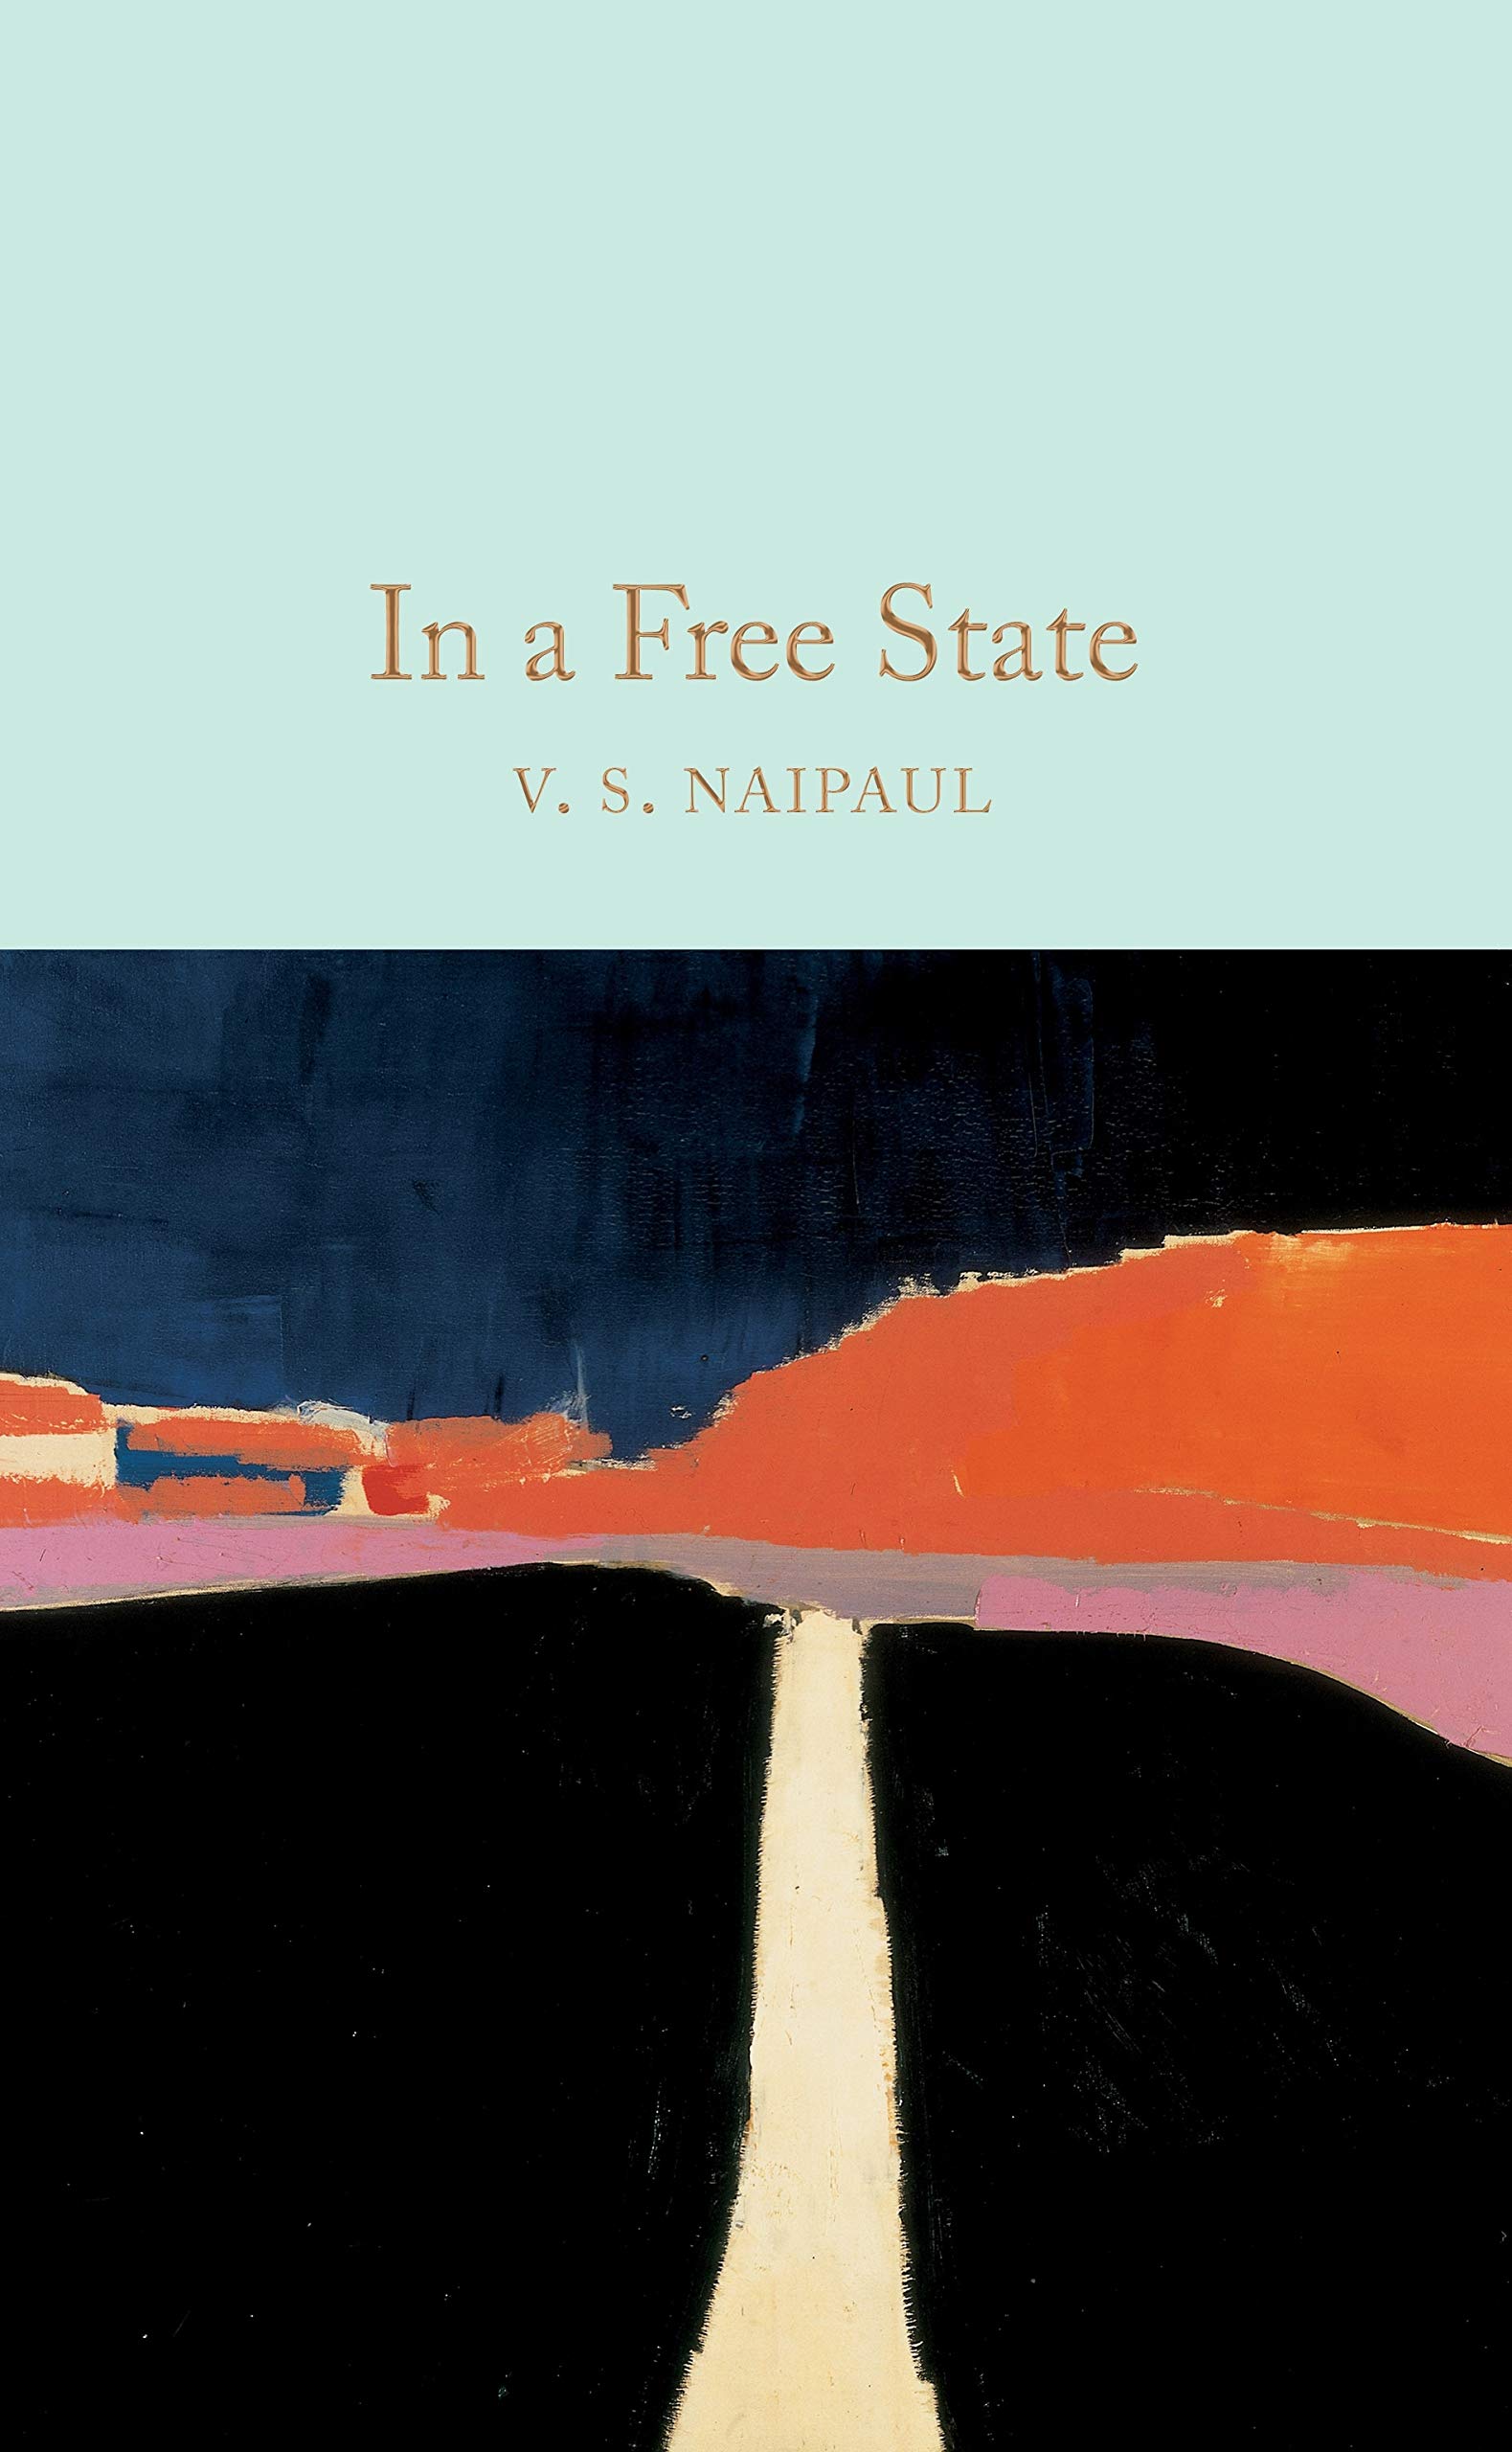 In a Free State | V. S. Naipaul image10